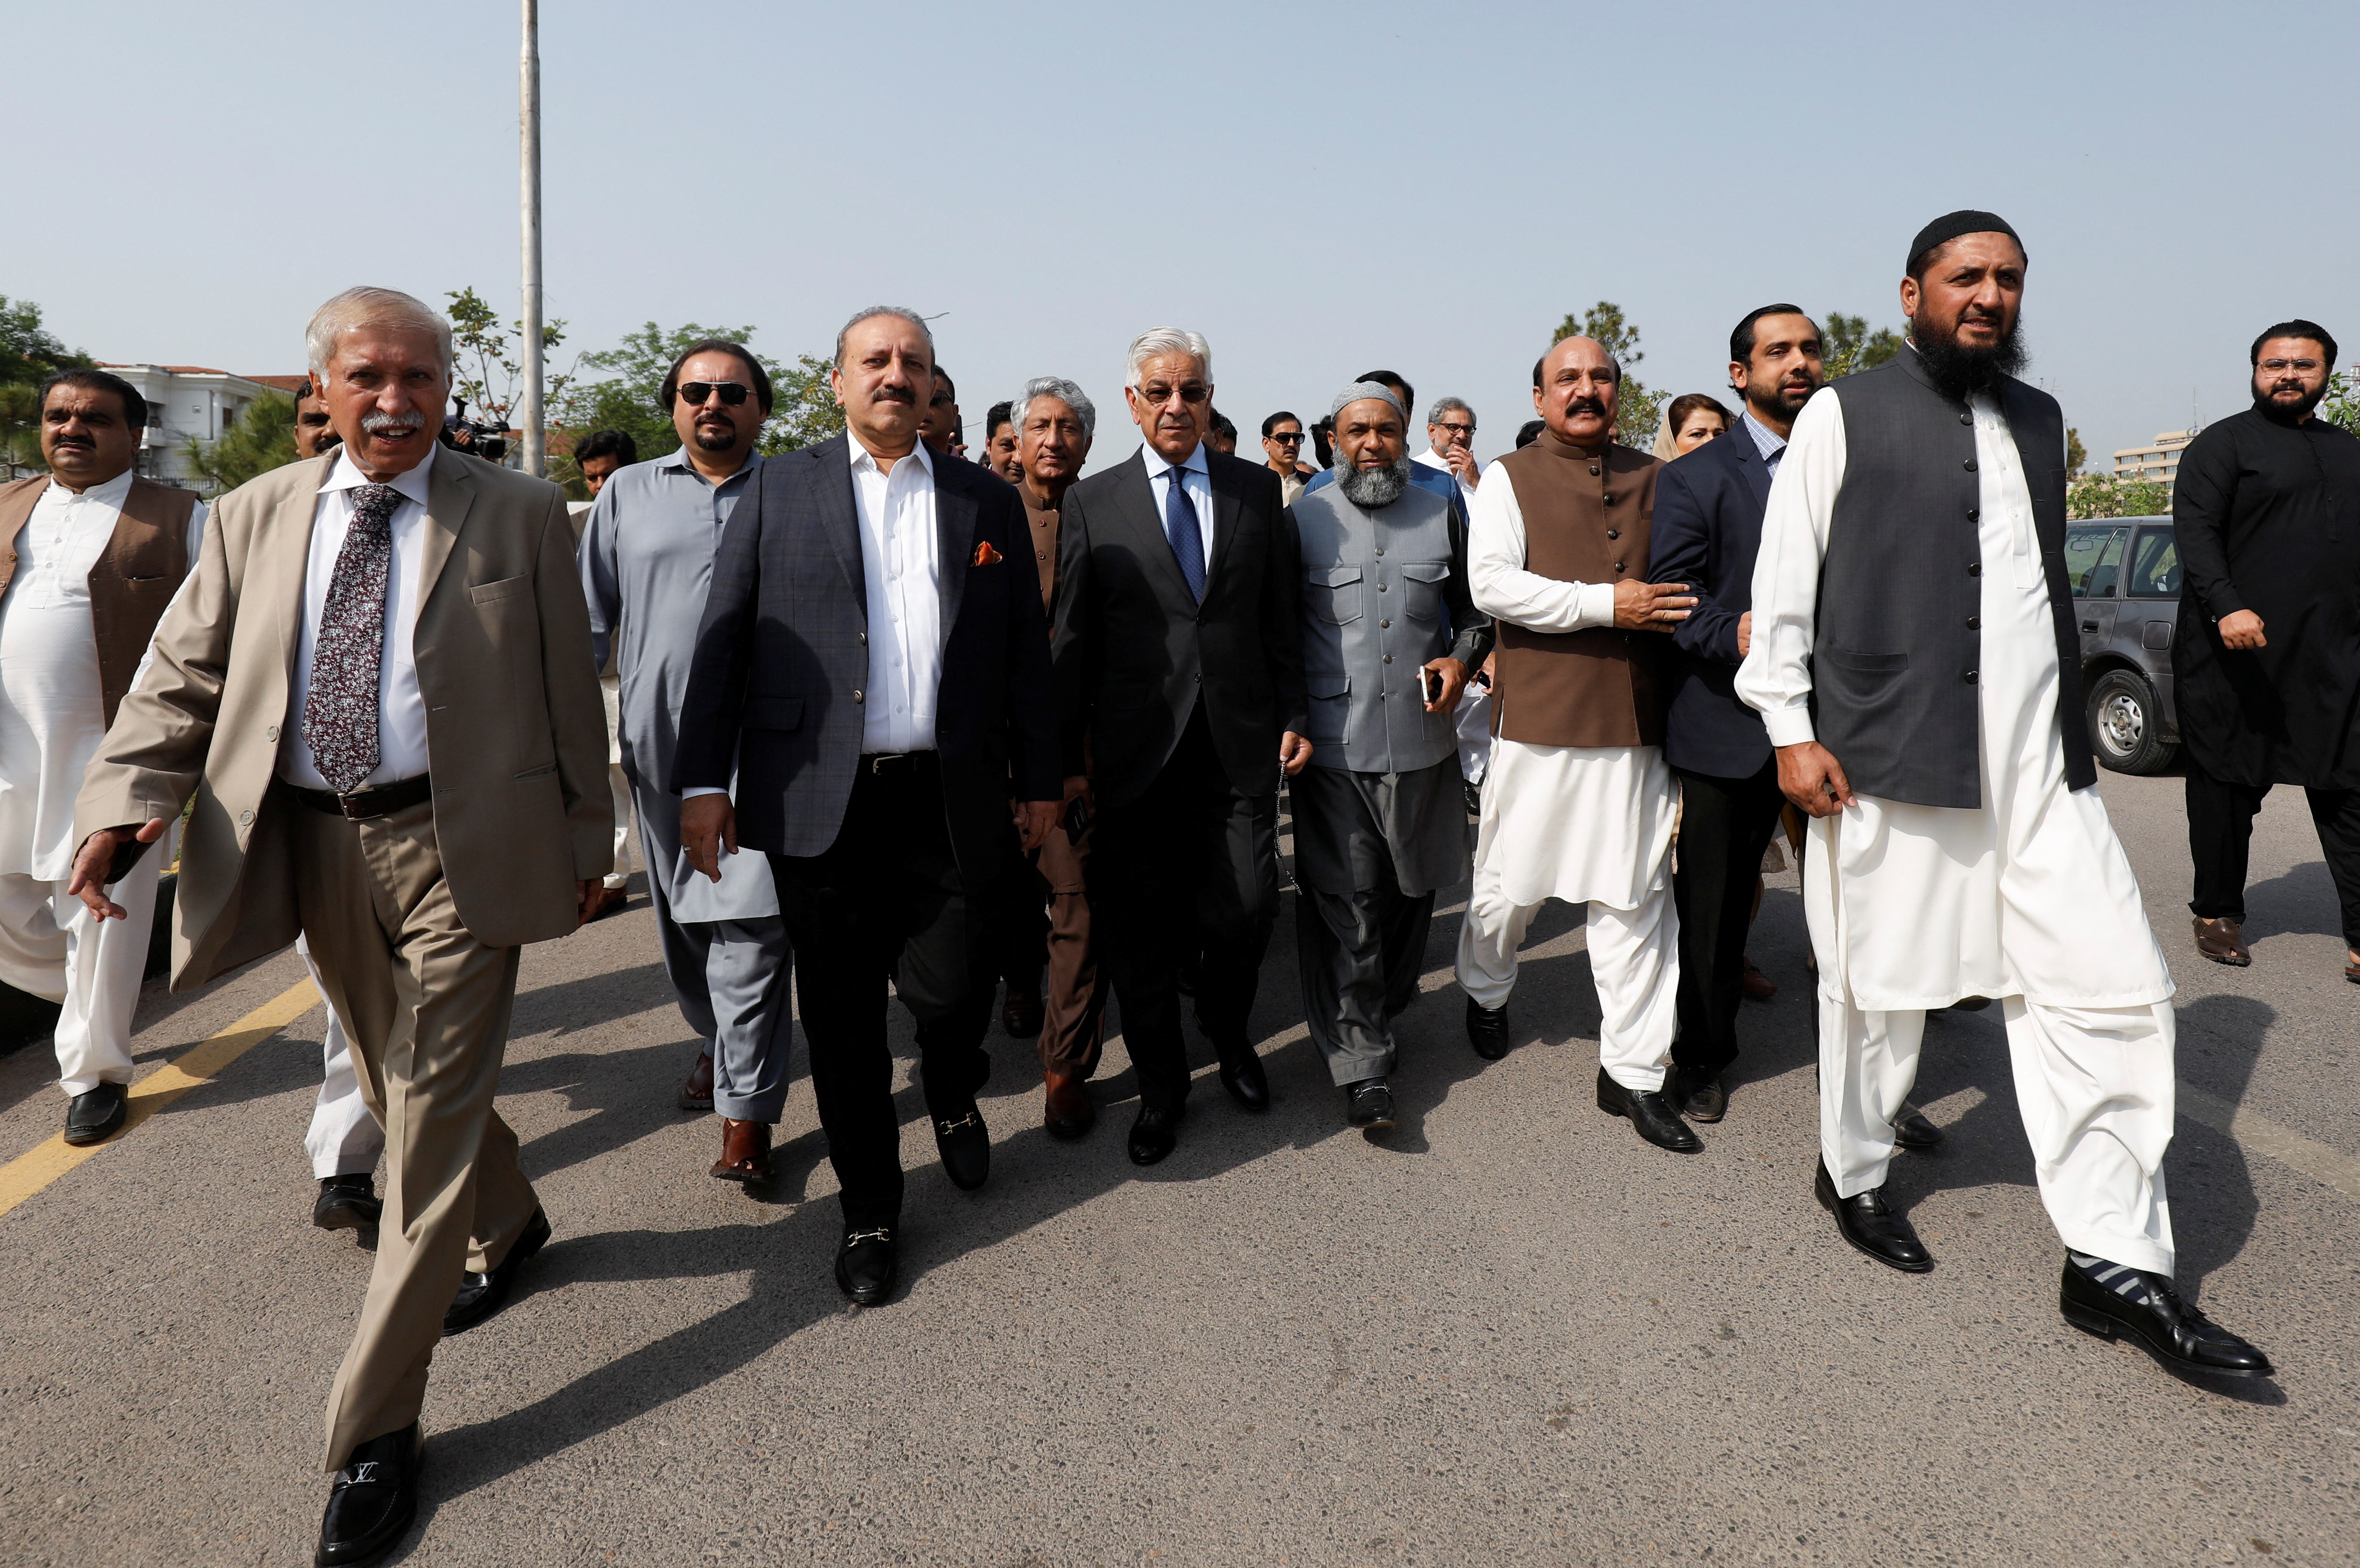 Pakistani lawmakers of the united opposition walk towards the parliament house building to cast their vote on a motion of no-confidence to oust PM Imran Khan, in Islamabad,